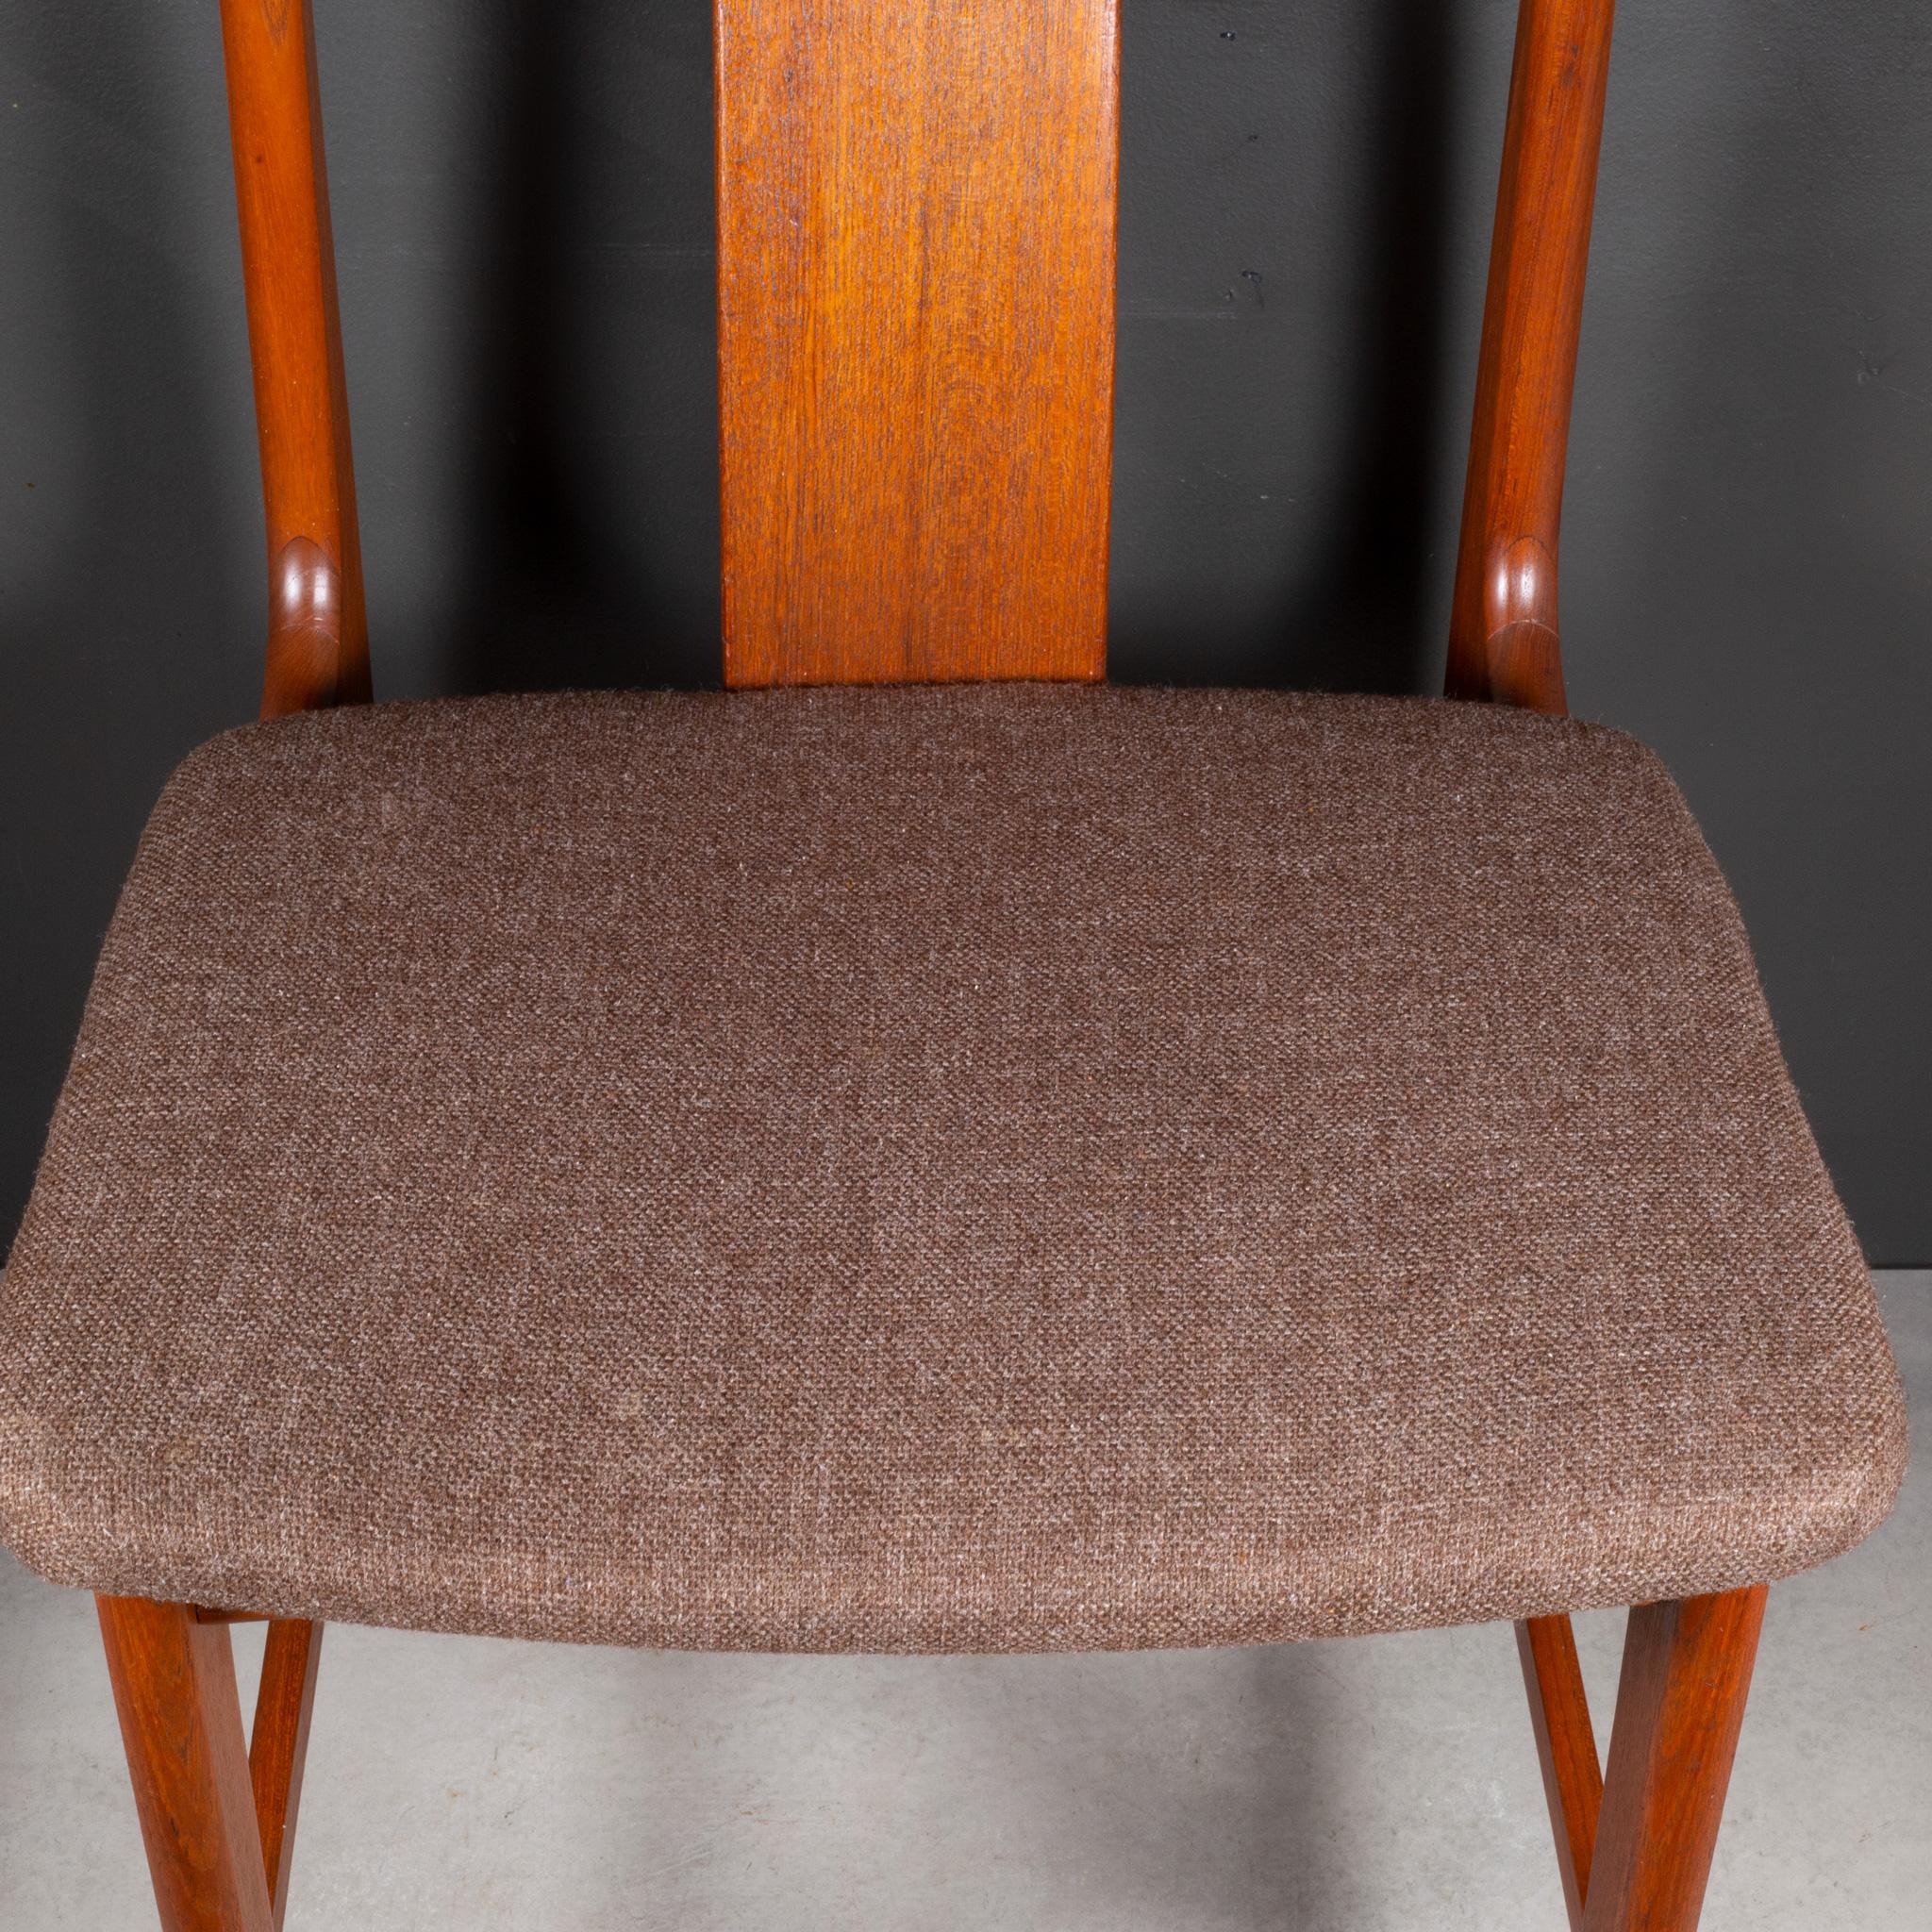 Midcentury Japanese Sculpted Teak Dining Chairs C.1960 For Sale 5